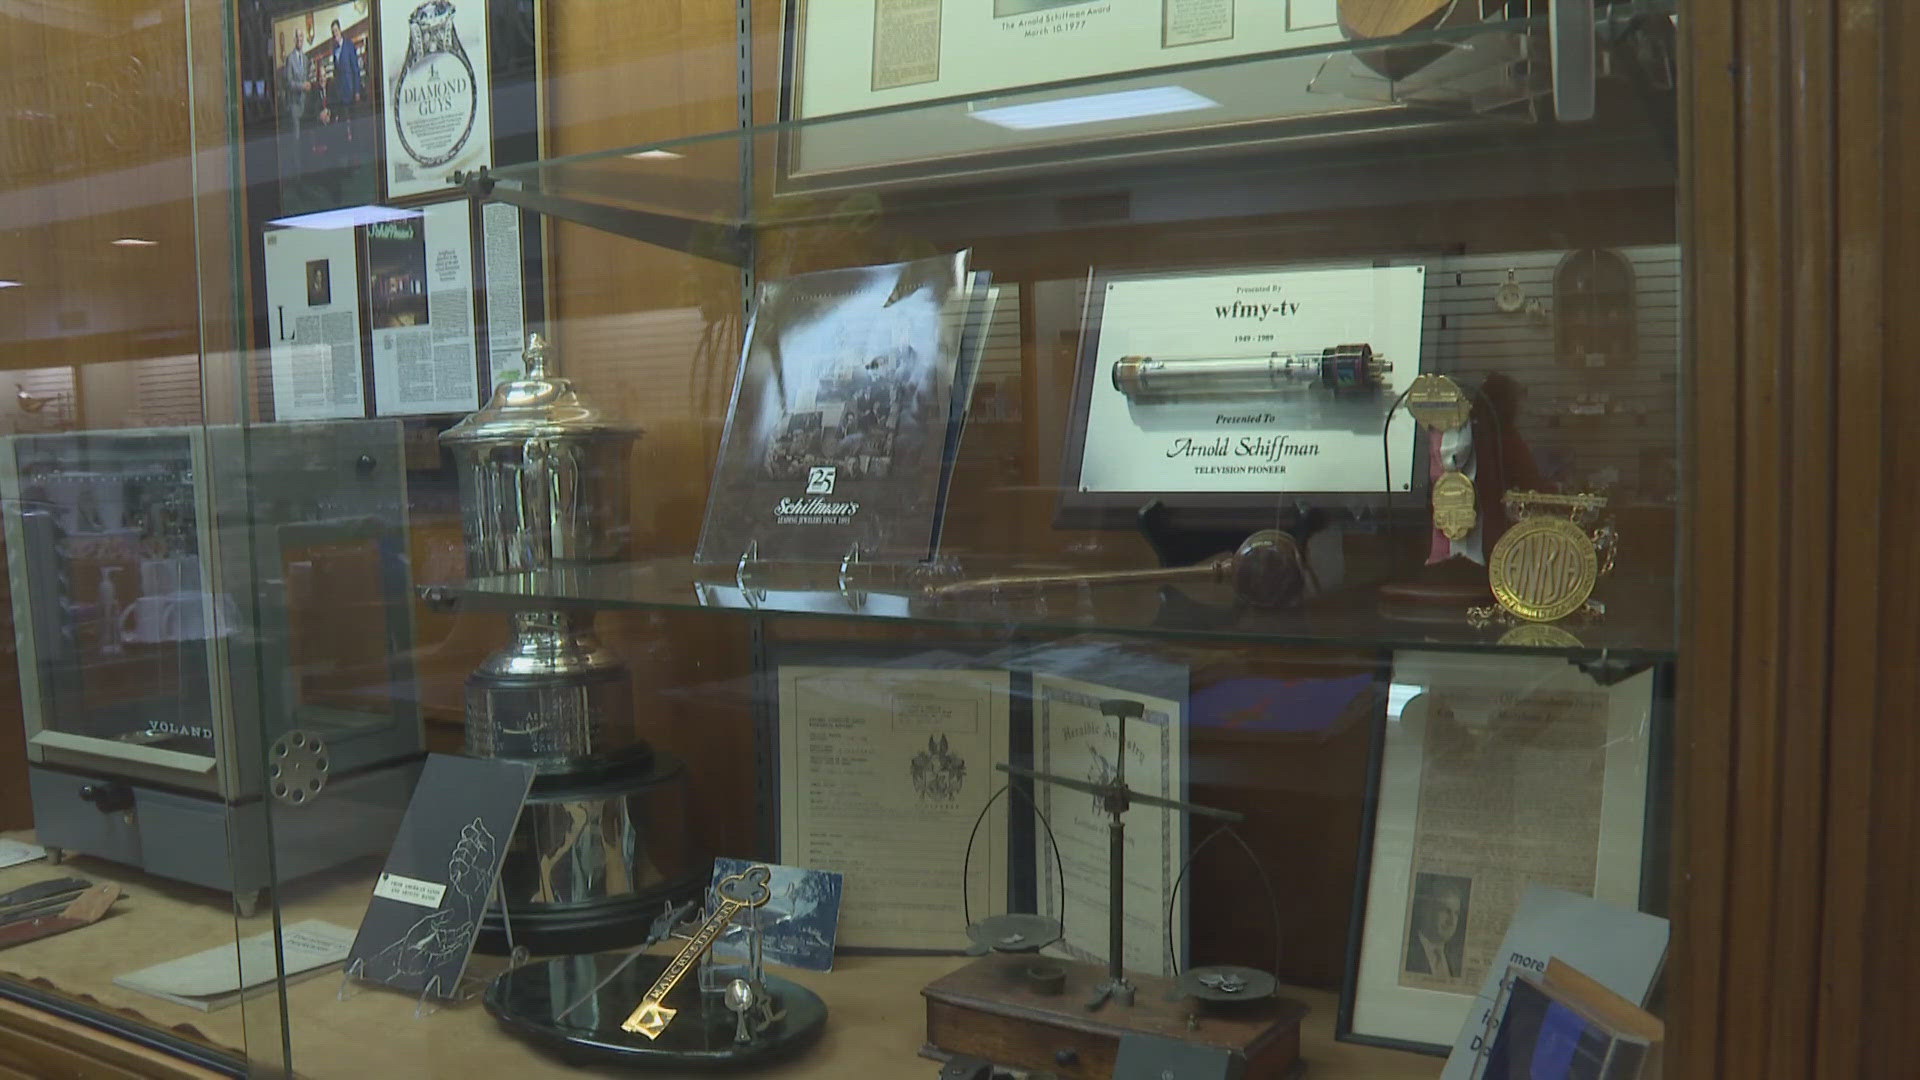 Schiffman's CEO looks back on the jewelry store's humble beginnings.